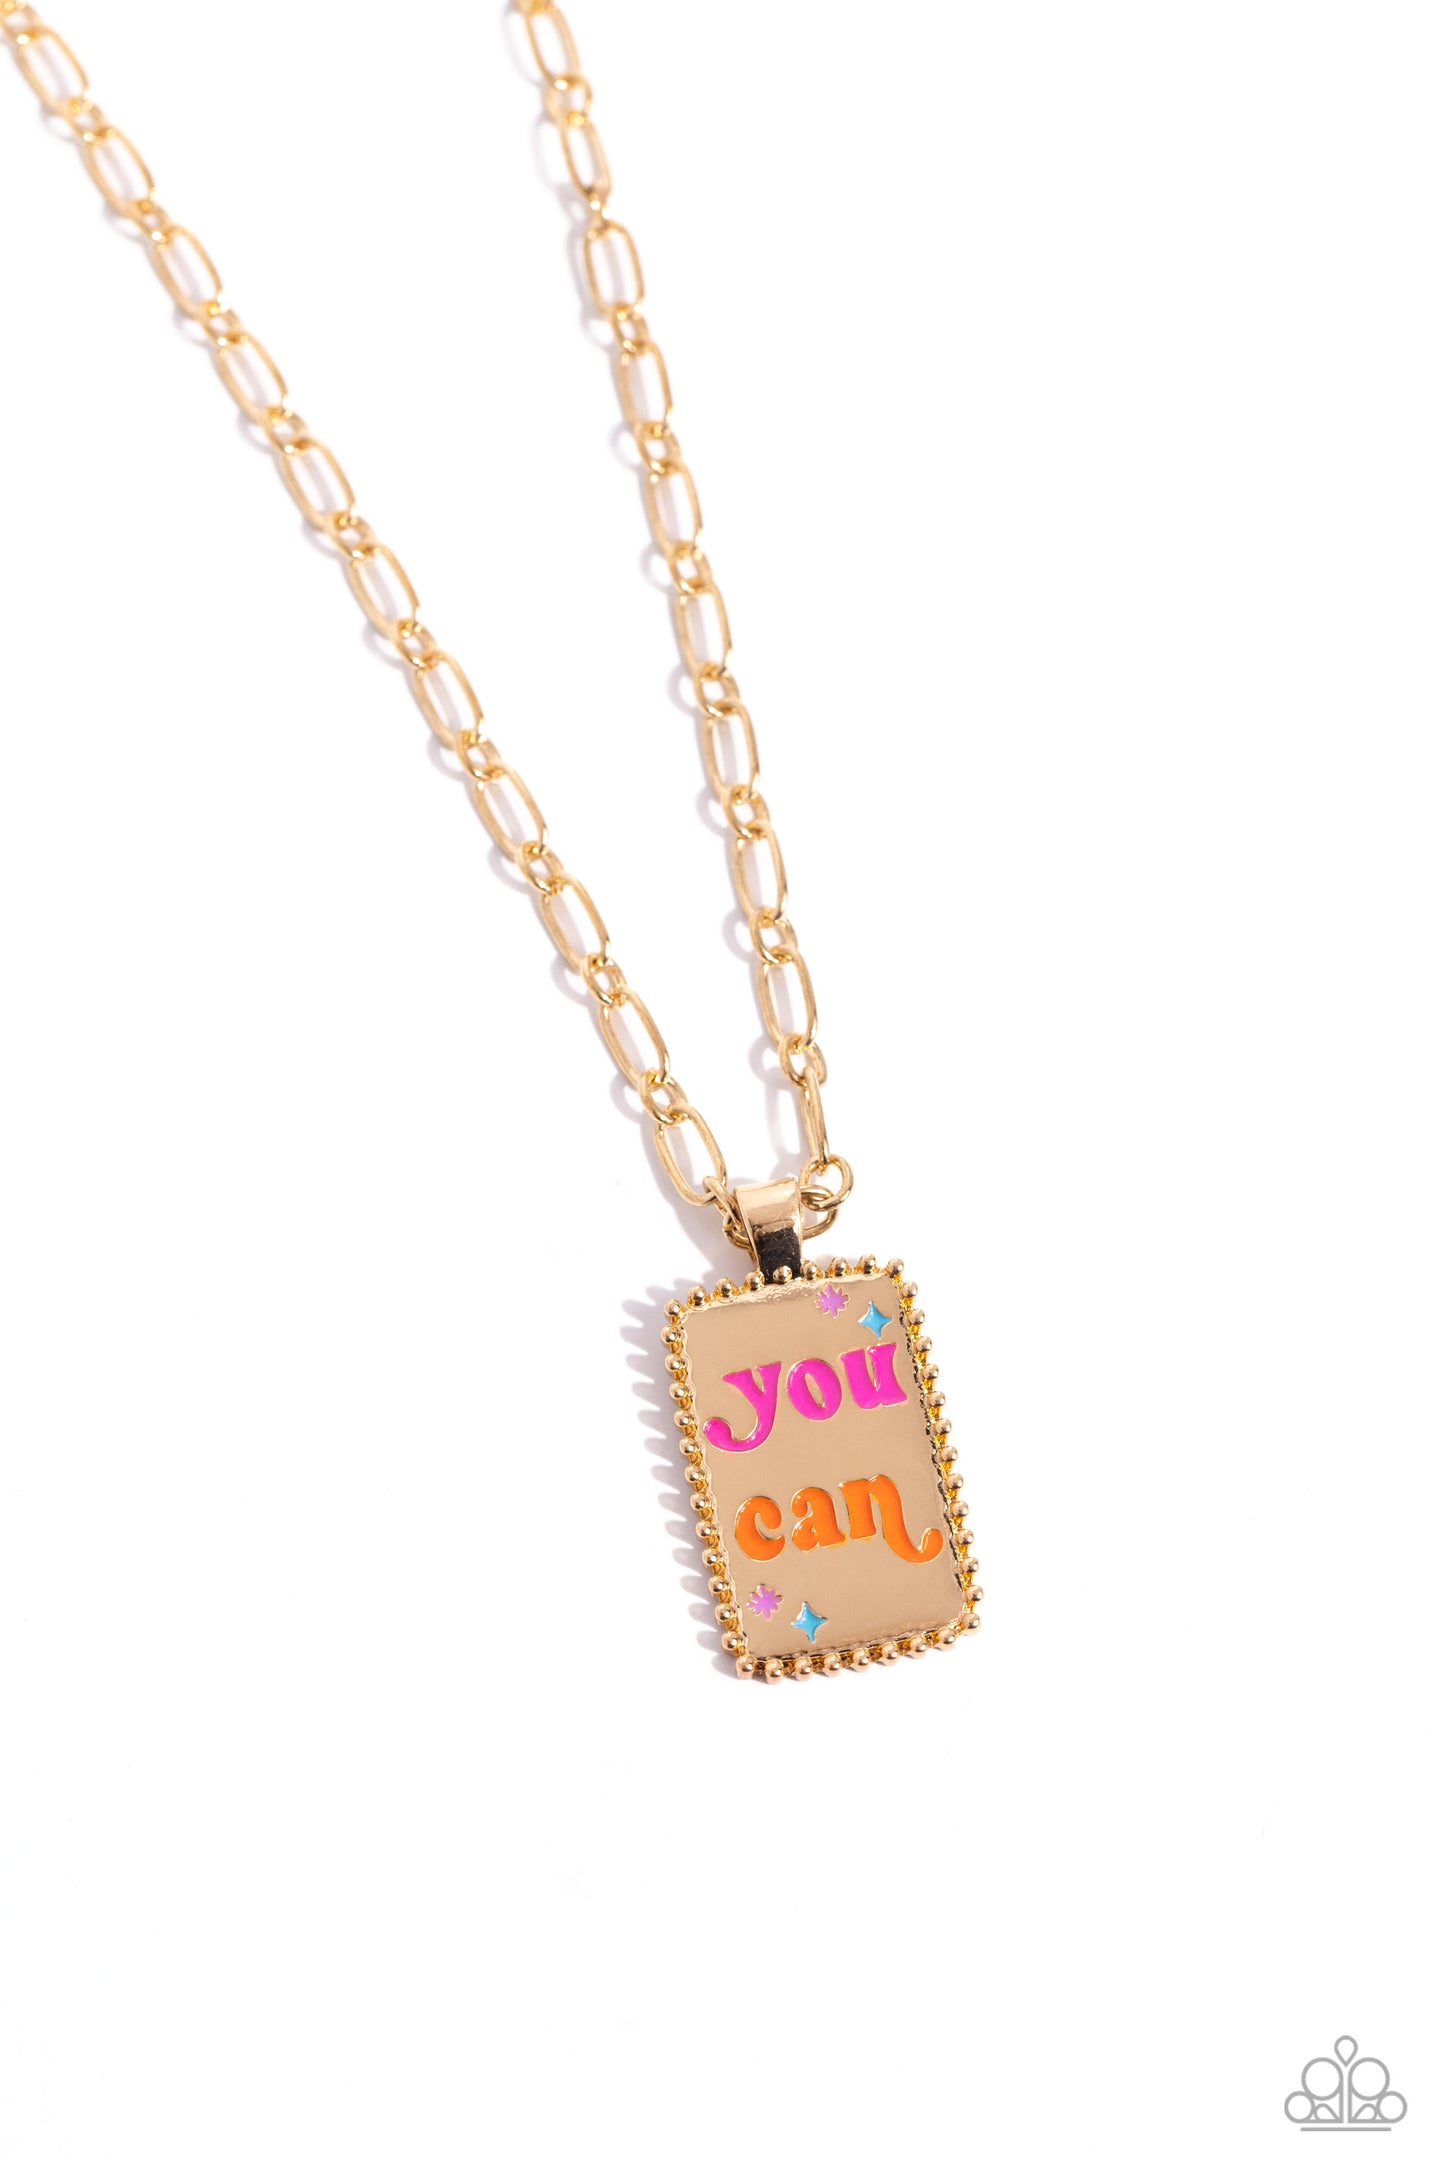 Yes You Can - Gold necklace